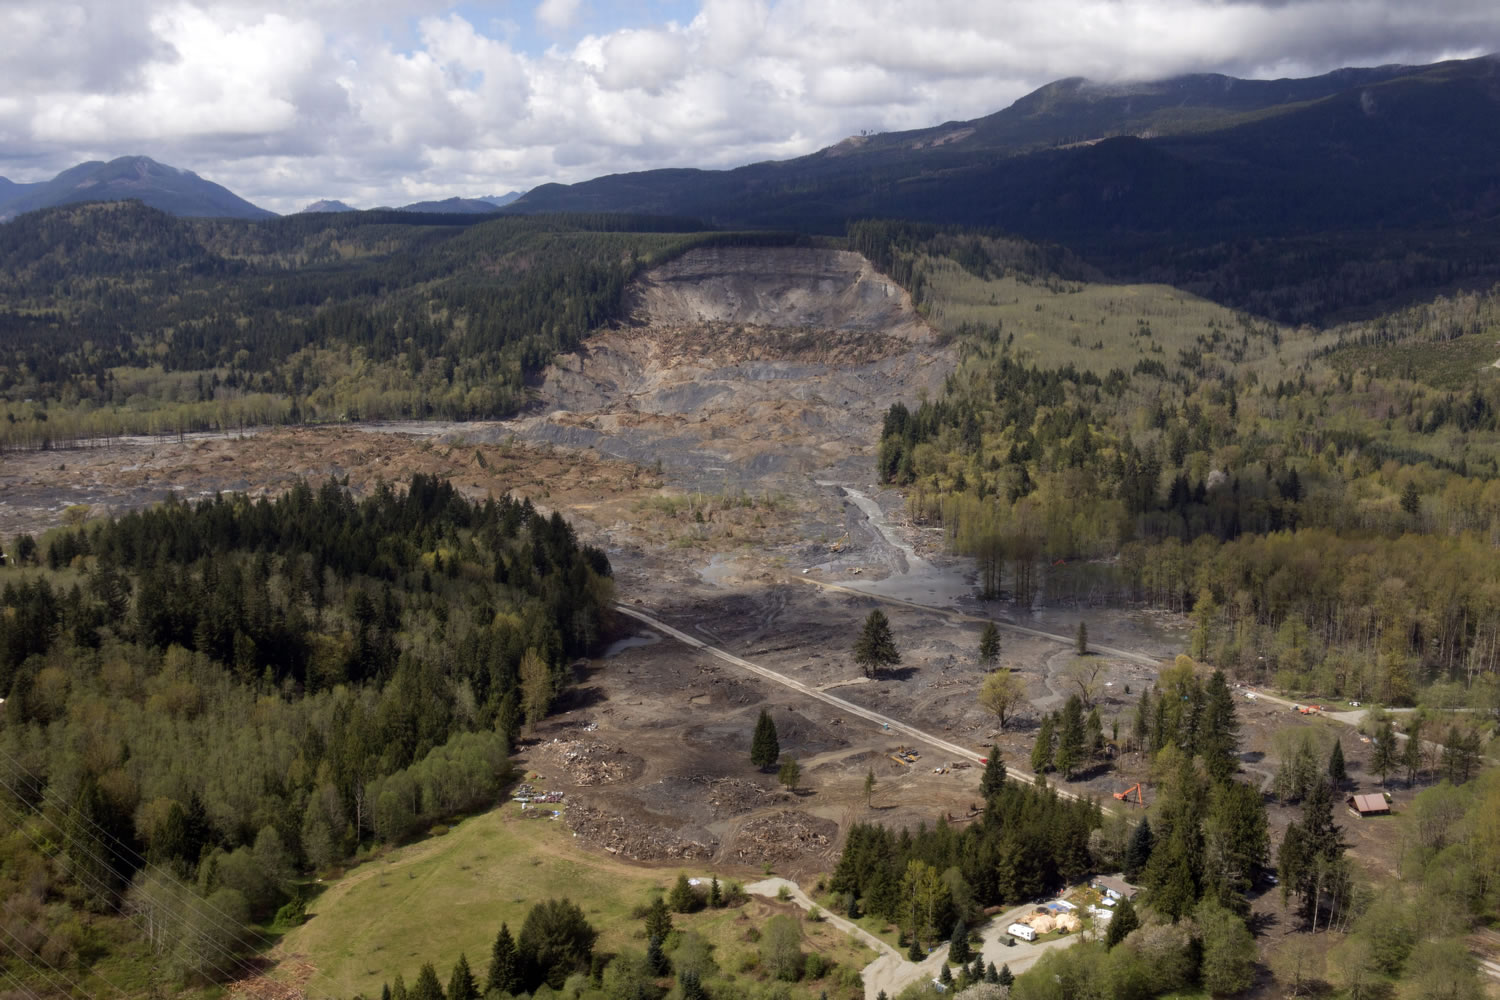 An ariel view shows damage in Oso on April 22 caused by deadly mudslide that struck the community in March.